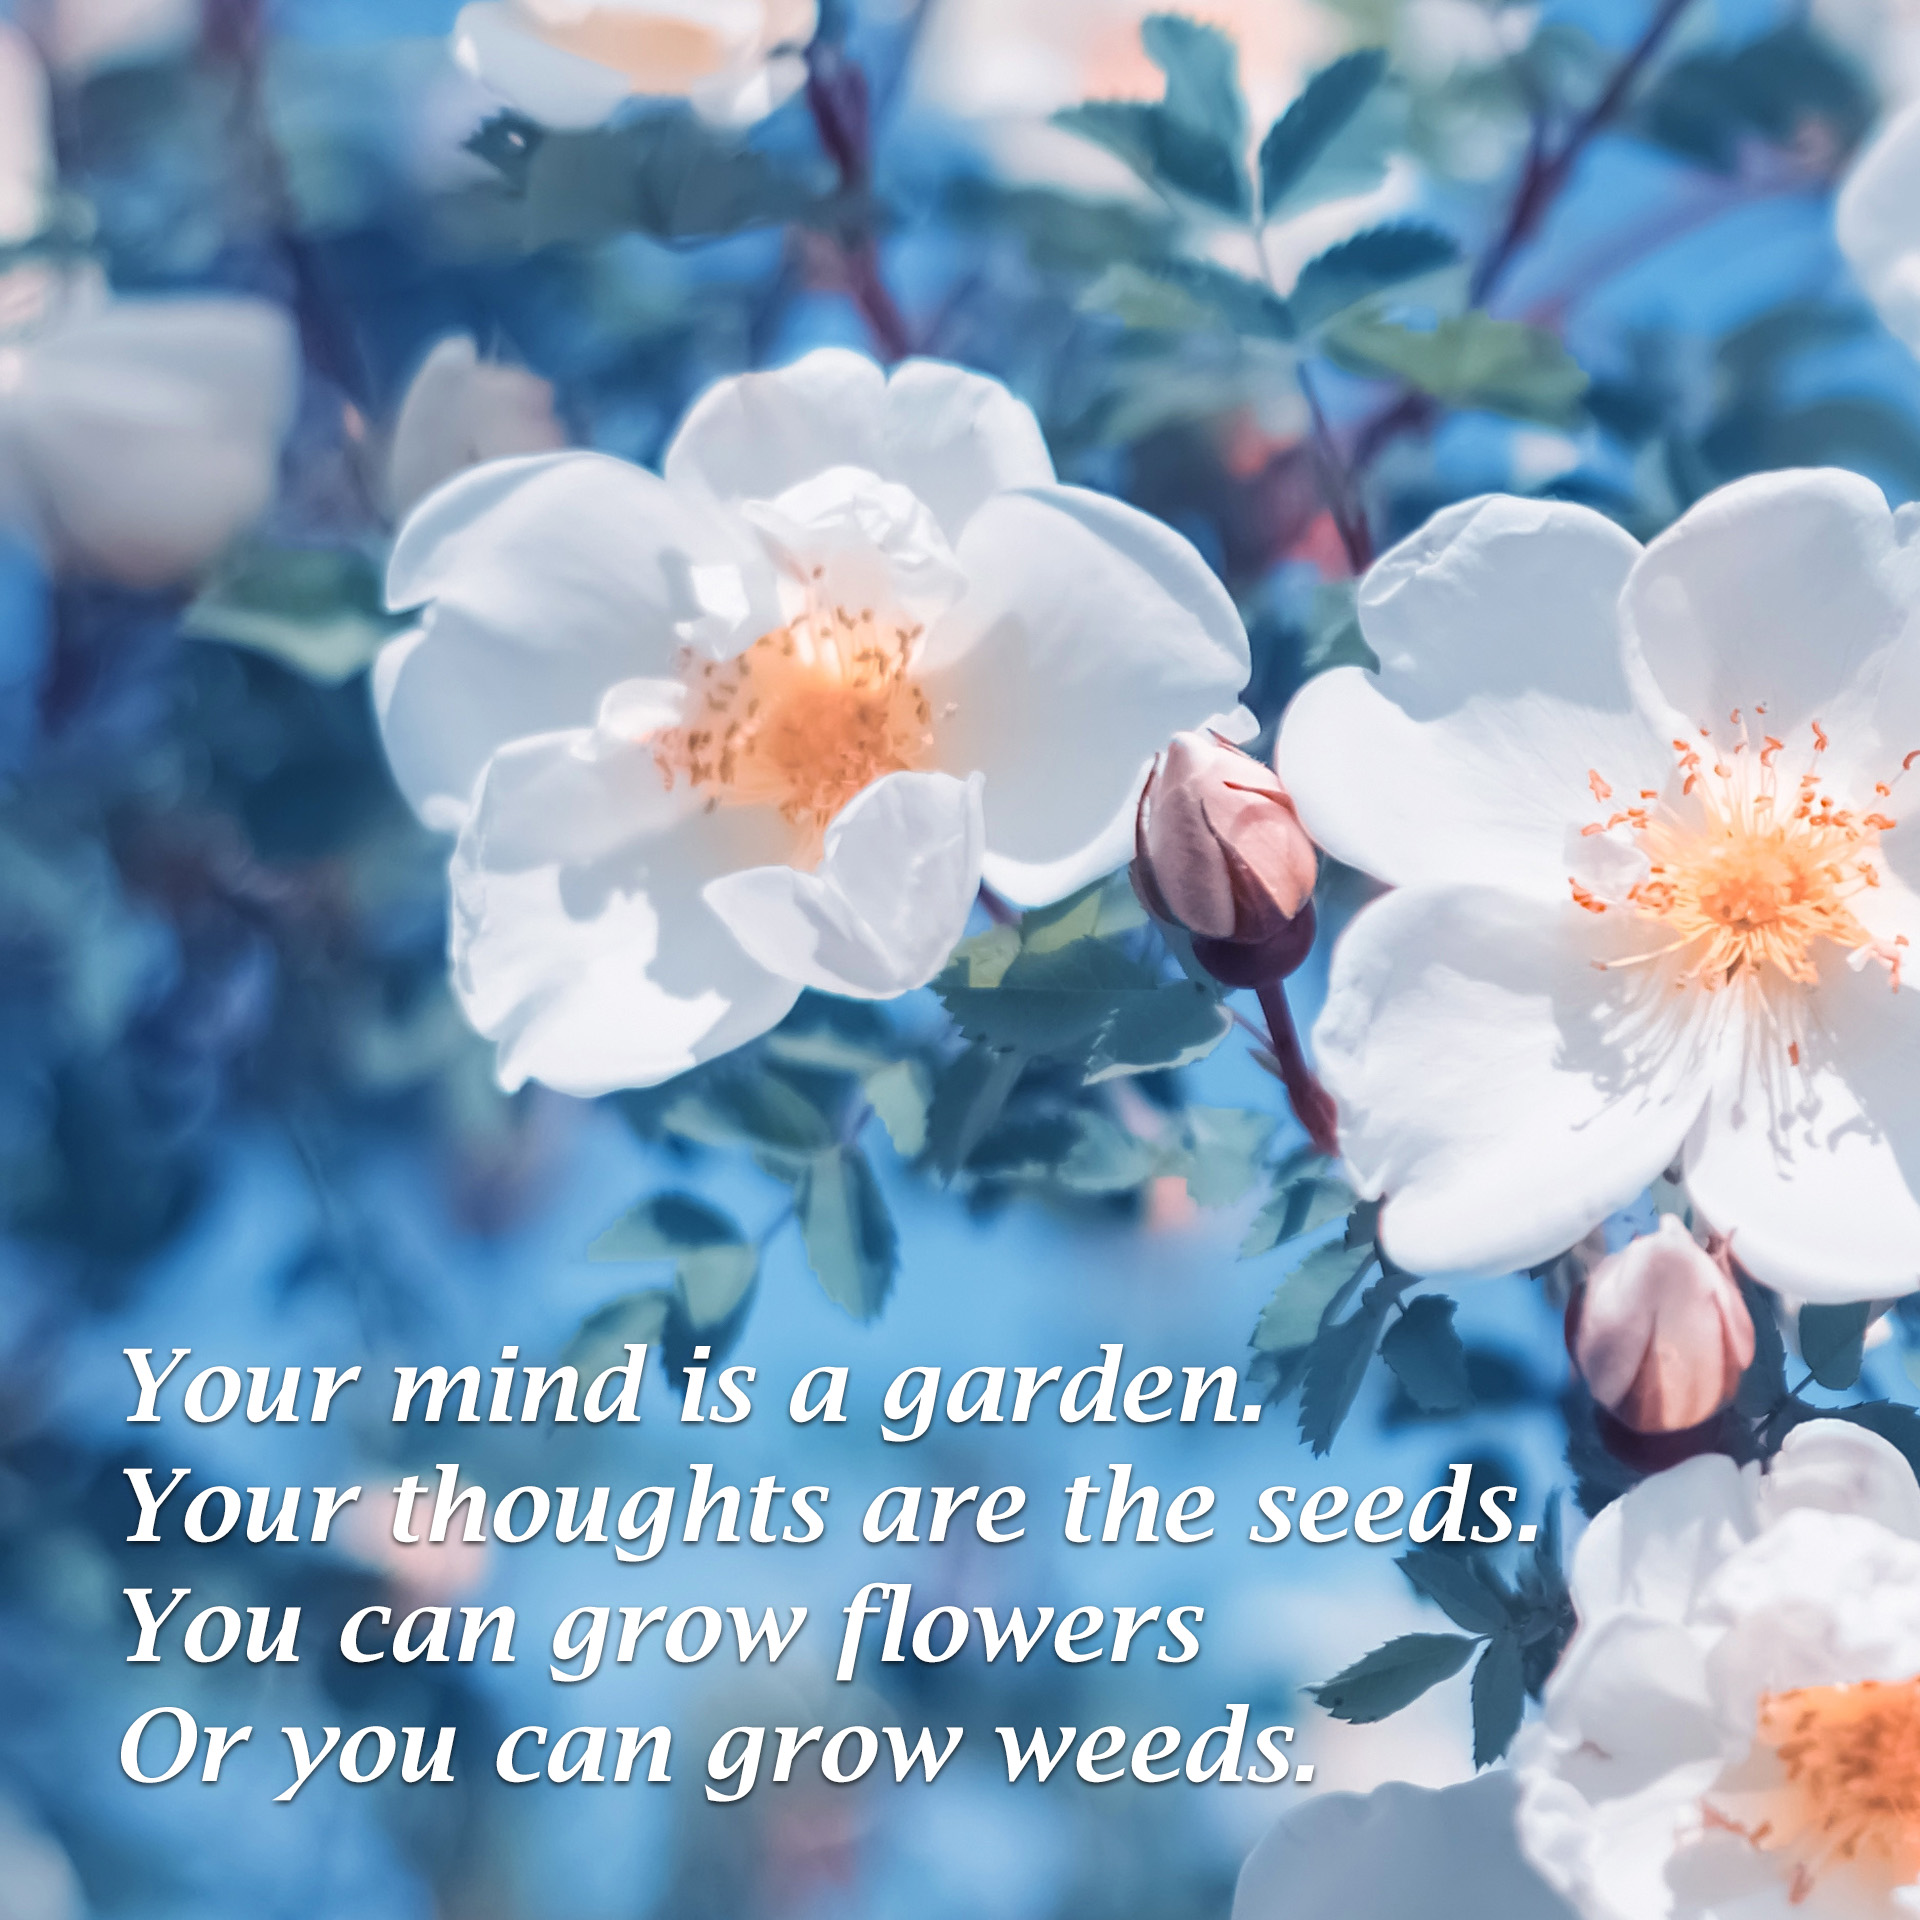 Your mind is a garden. Your thoughts are the seeds. You can grow flowers or you can grow weeds.